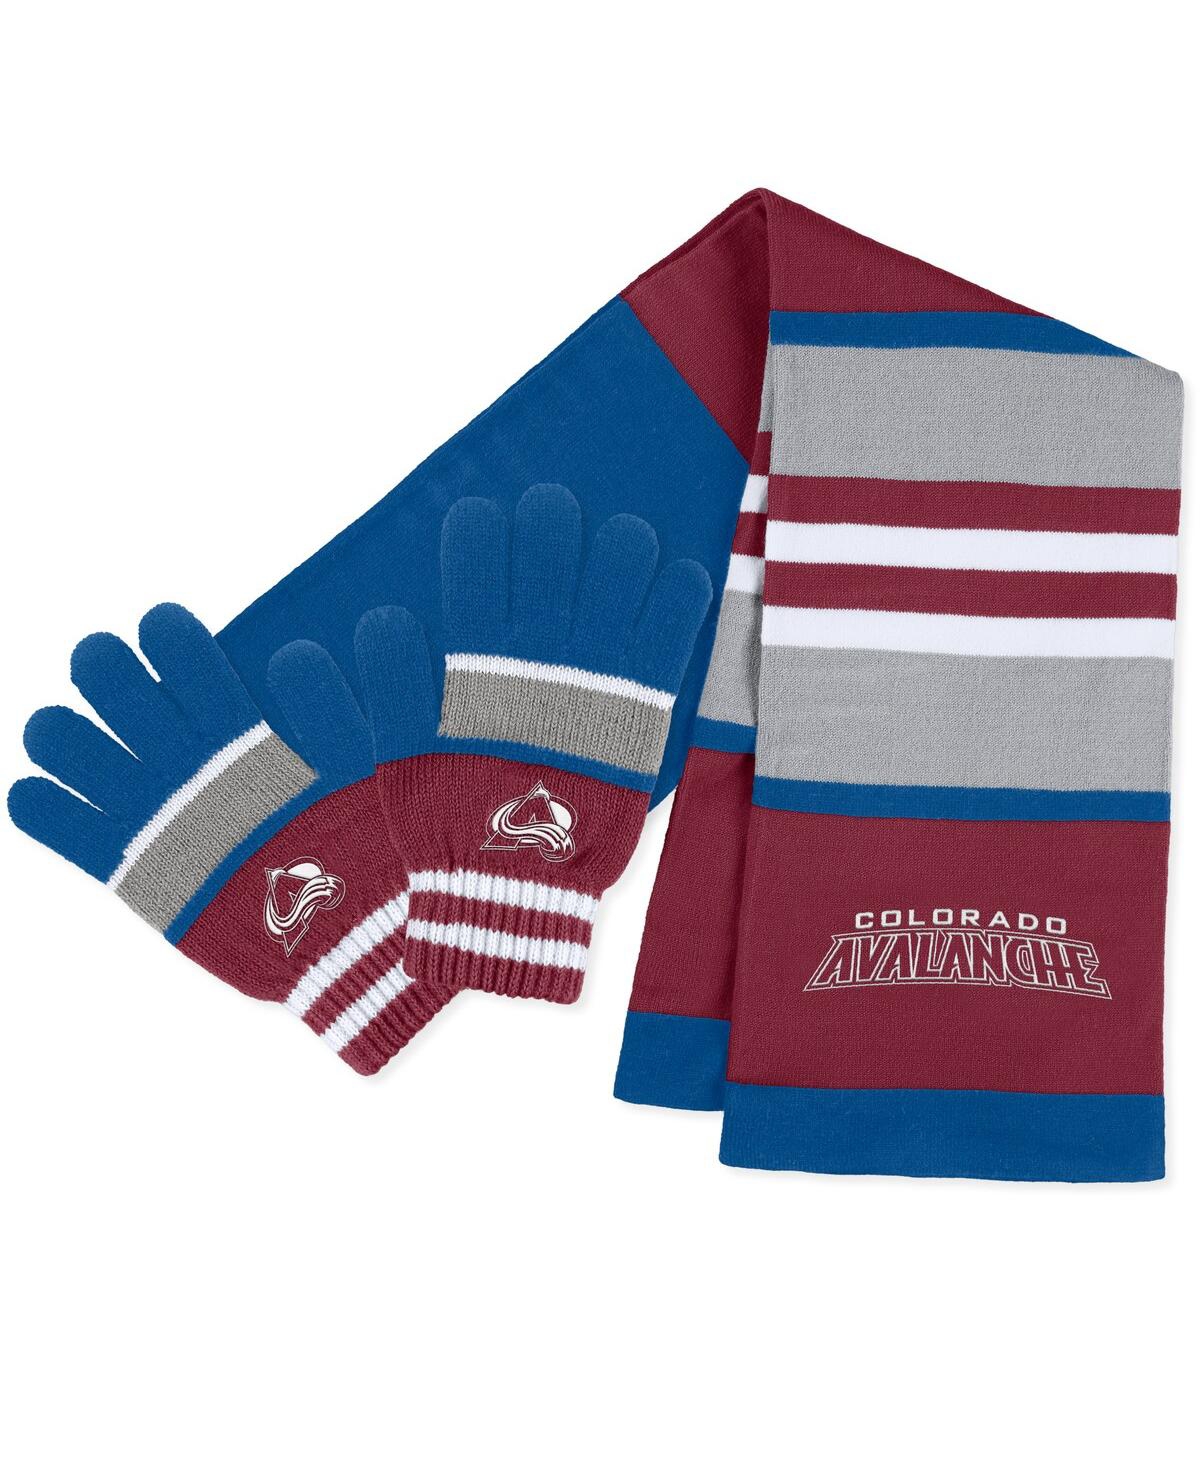 Women's Wear by Erin Andrews Colorado Avalanche Stripe Glove and Scarf Set - Multi